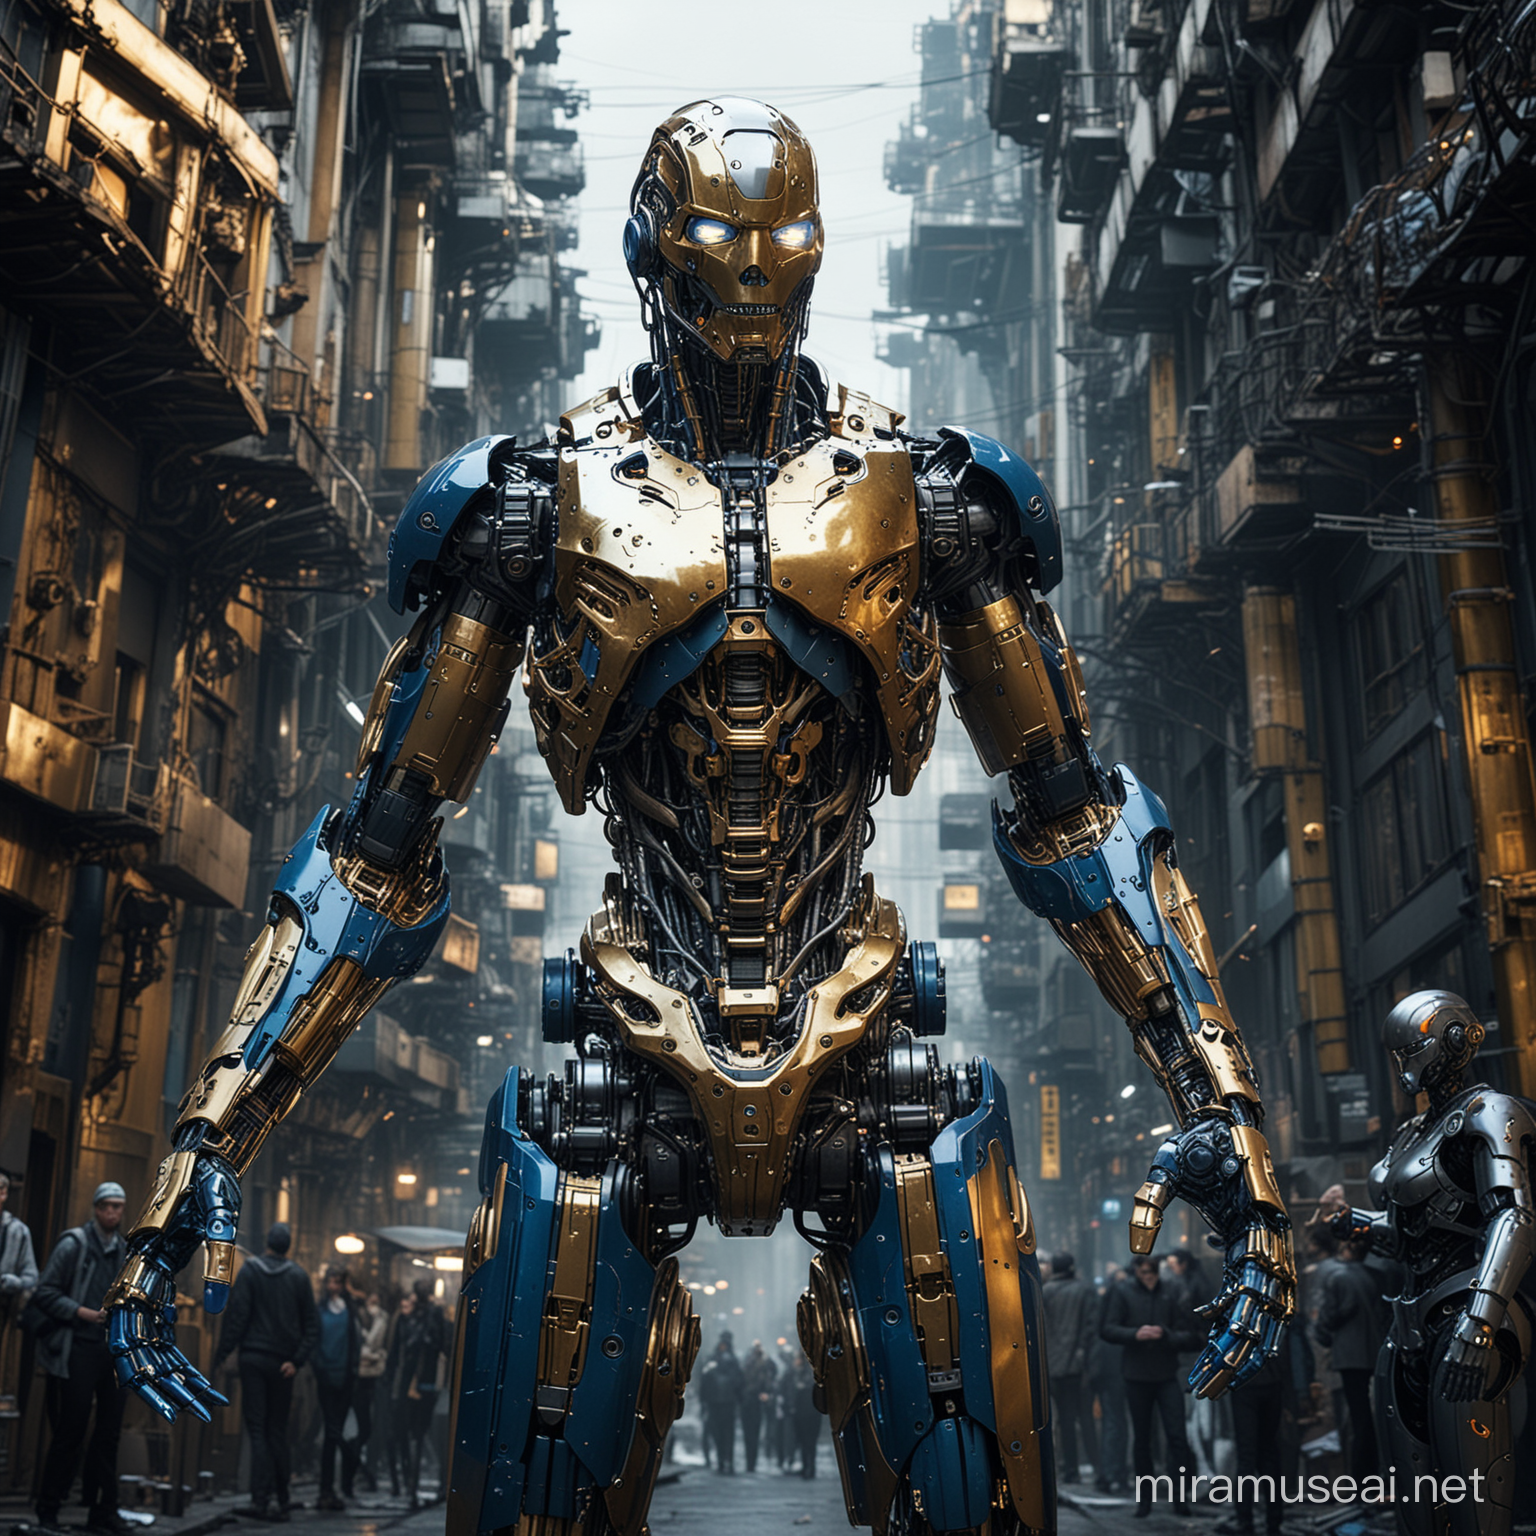 The complex, mechanical cyborg with a background depicting a war between cyborgs, with a view from below to make it look taller and more imposing, with enhanced lighting effects to highlight its details, shown in the 3D image. Various meticulously crafted mechanical parts come together to form a standing human body. Gold and dark blue metallic colors dominate. Street photography style, sigma 85mm f/8 lens.
